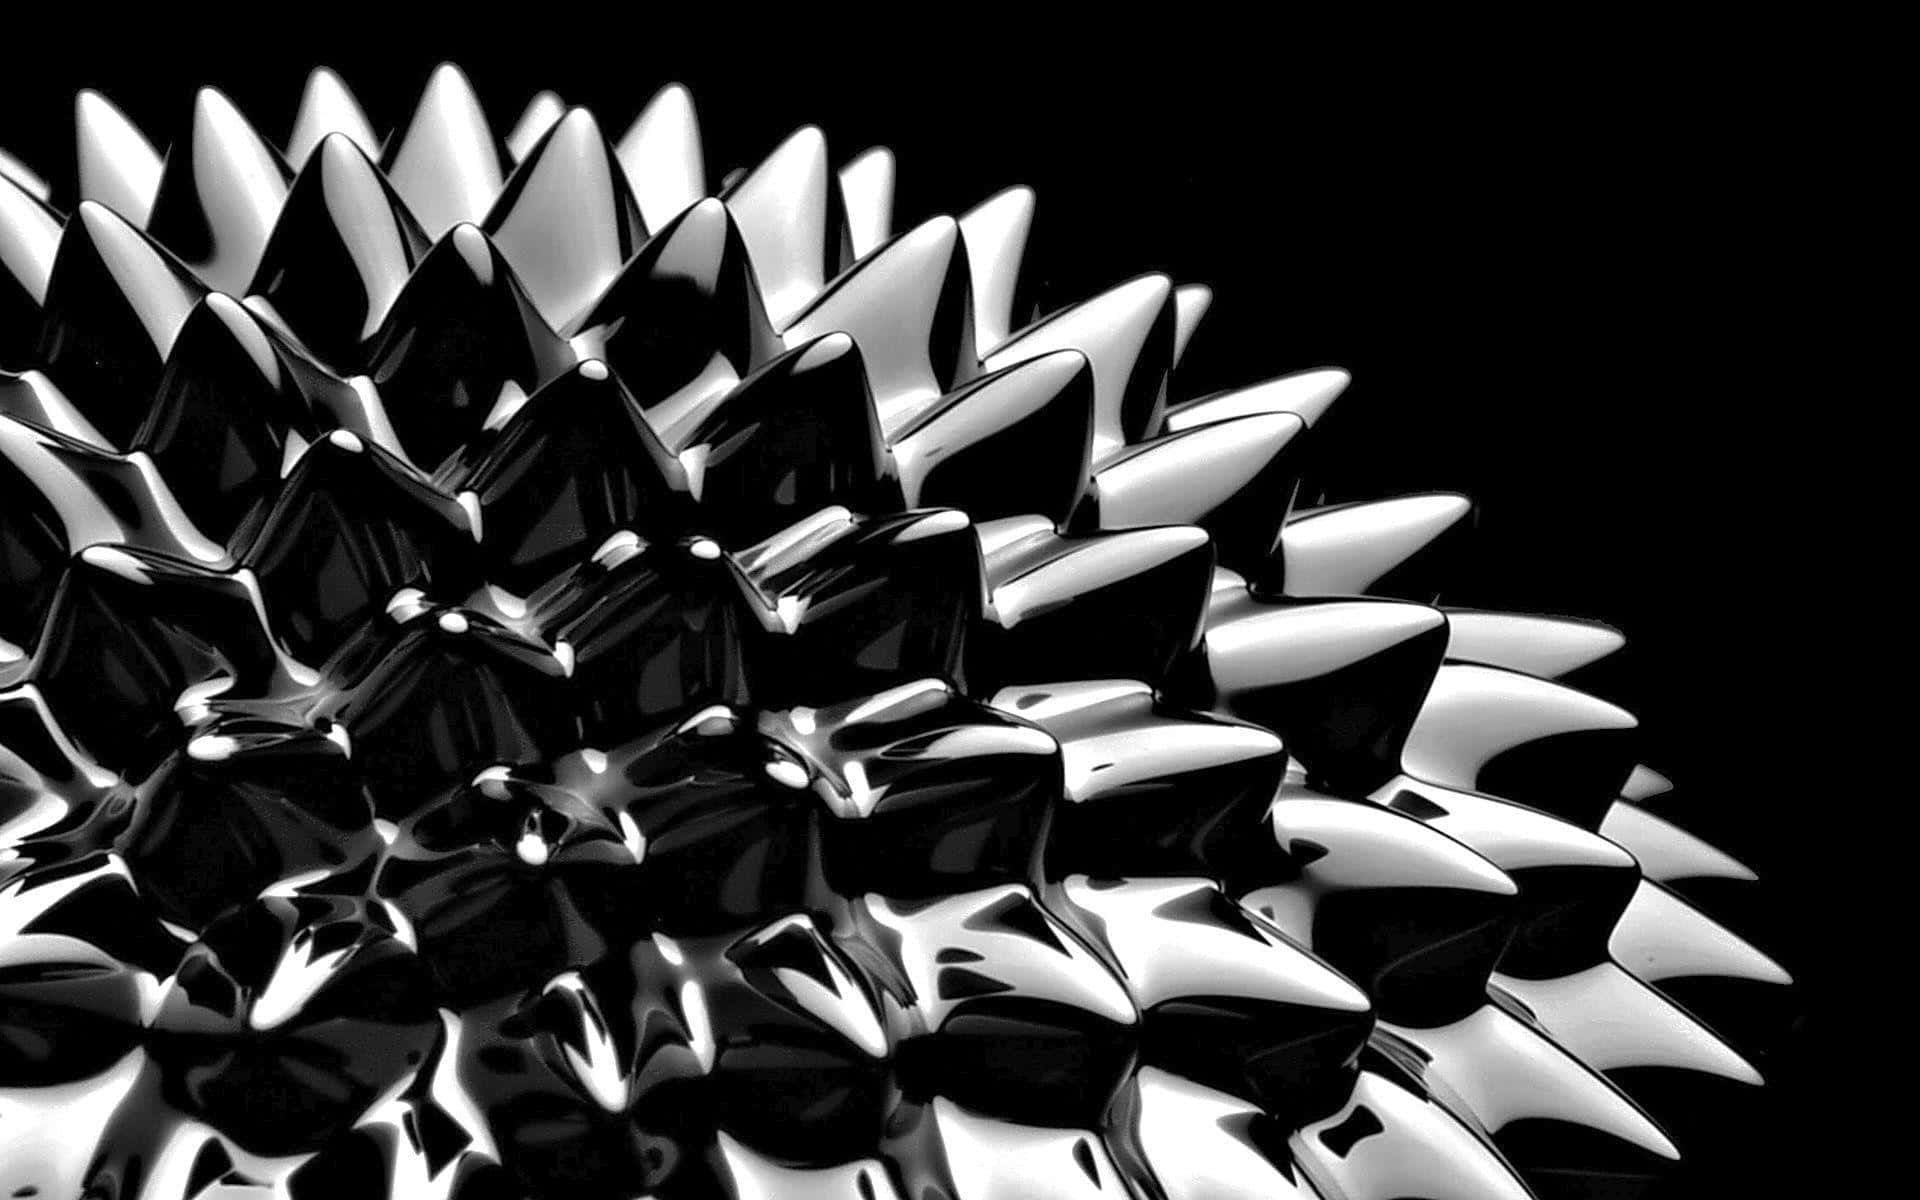 A Black And White Image Of A Spiked Ball Wallpaper